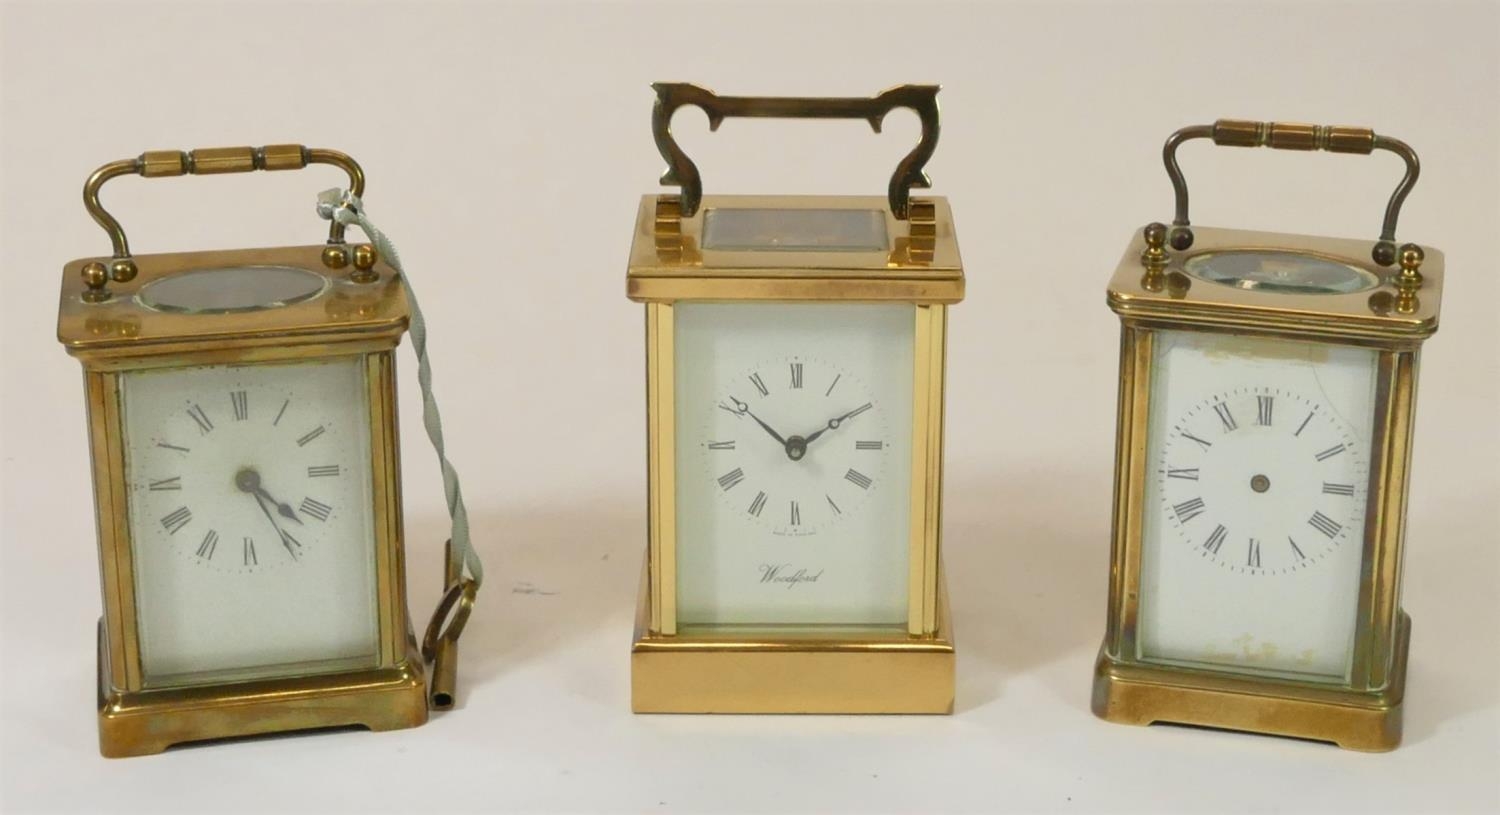 A Woodford, brass manual wind carriage clock 17 cm, together with two unmarked brass carriage clocks